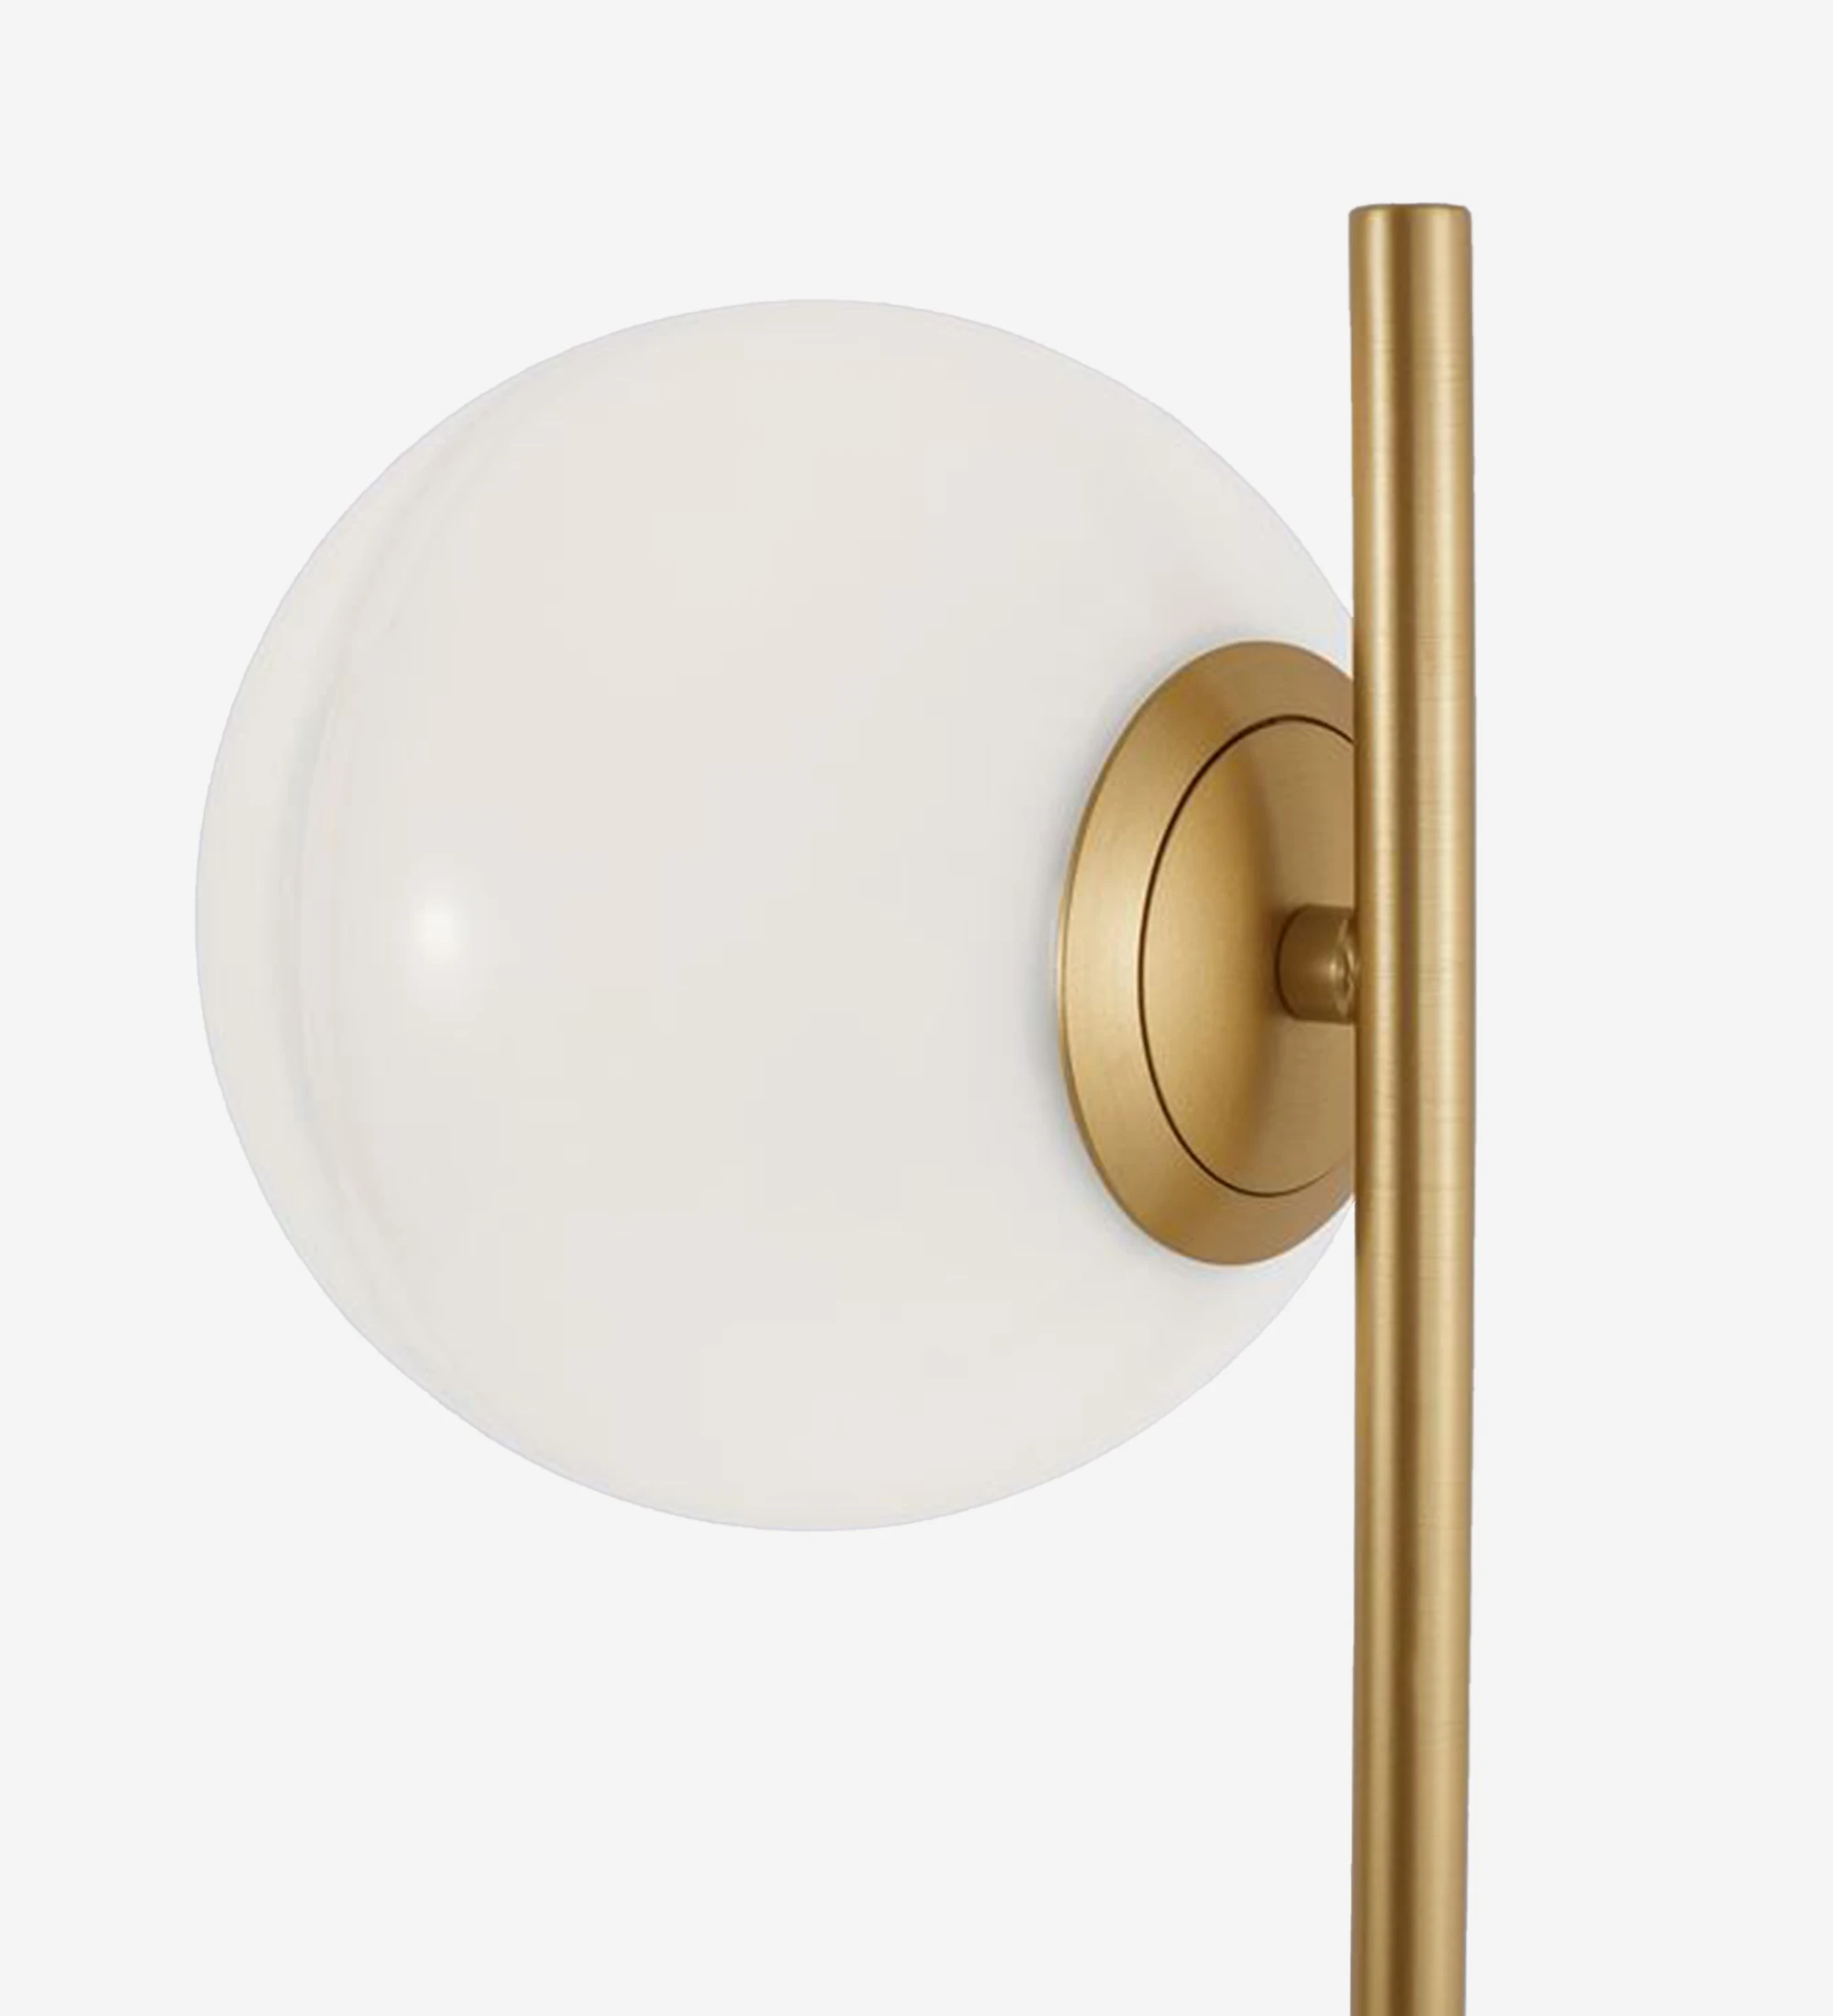 Table lamp with marble base, golden metal and opal structured glass lampshade.